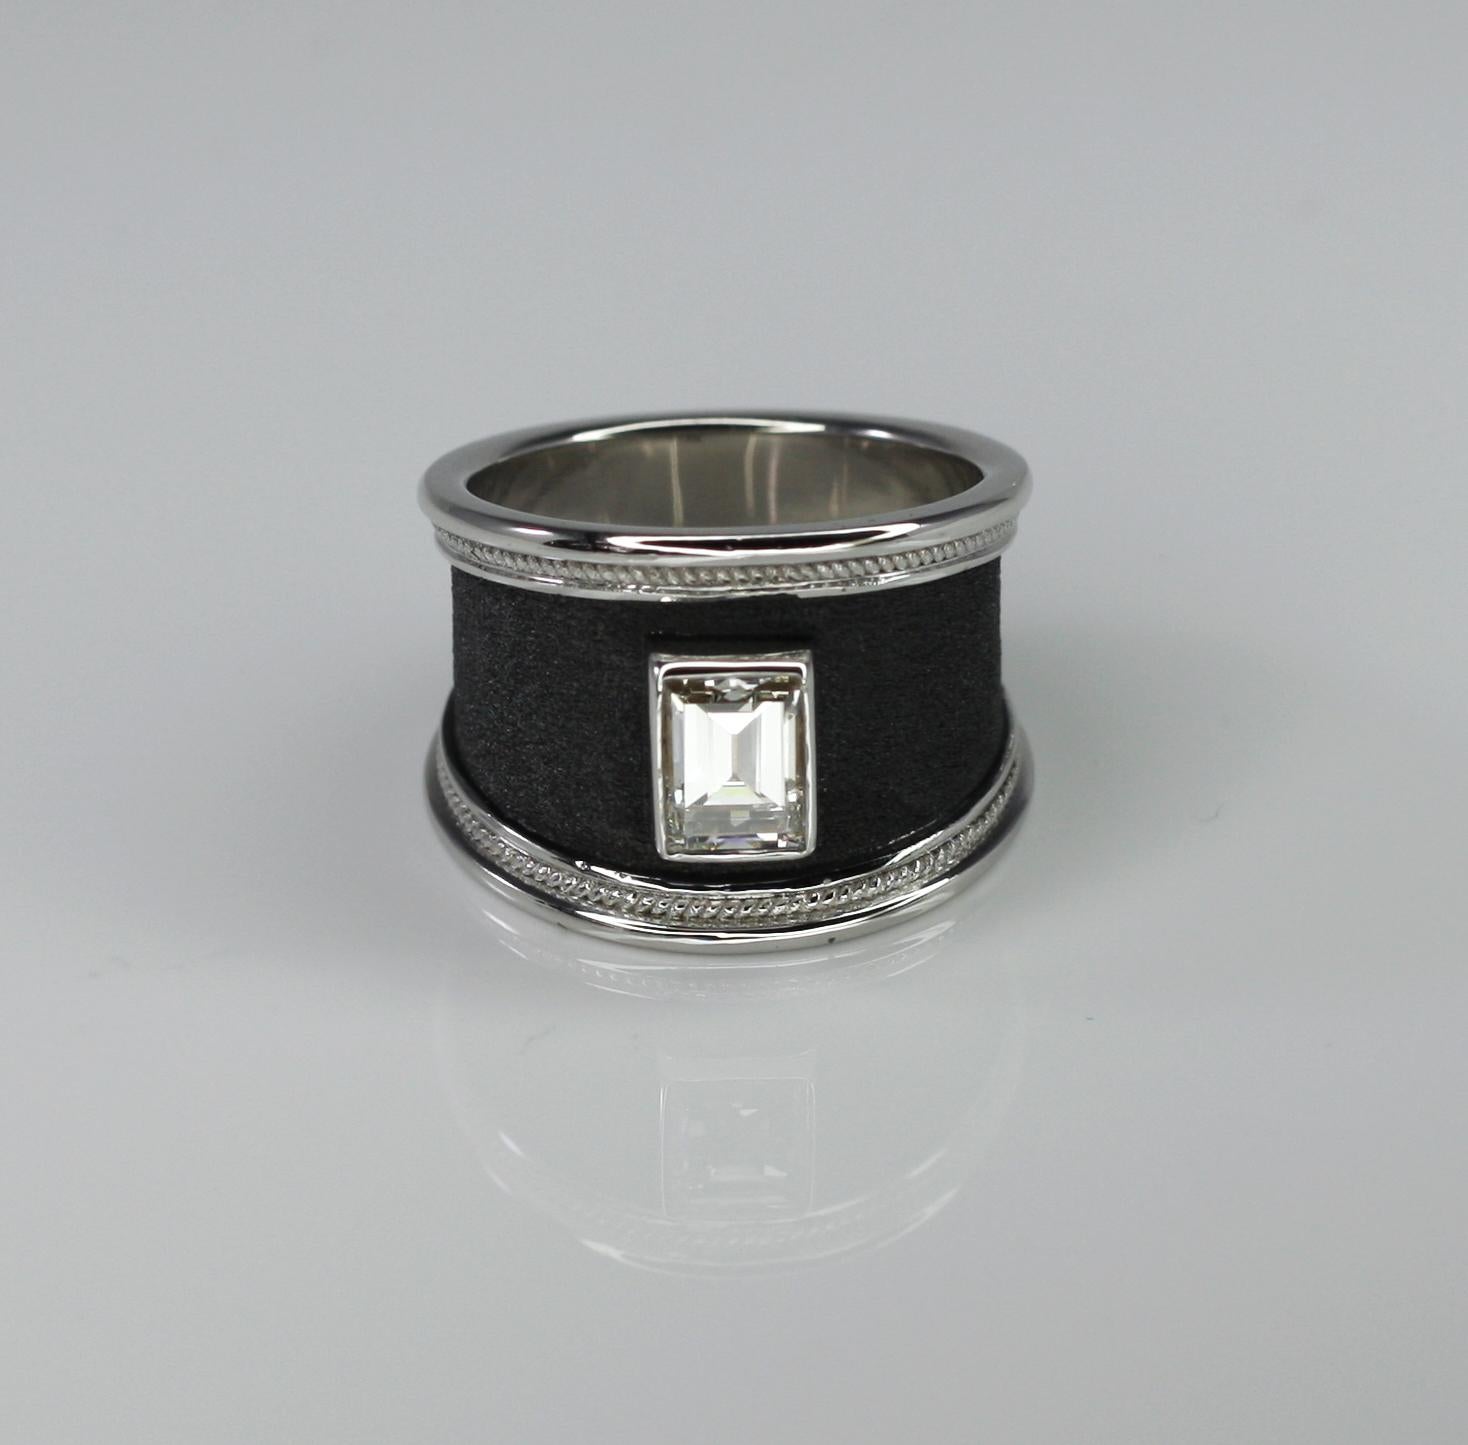 S.Georgios design ring handmade from solid 18 Carat White Gold and decorated with granulation and Byzantine velvet background finished in Black Rhodium.  This gorgeous unisex ring features a 1.16 Carat Emerald Cut White Diamond of exceptional